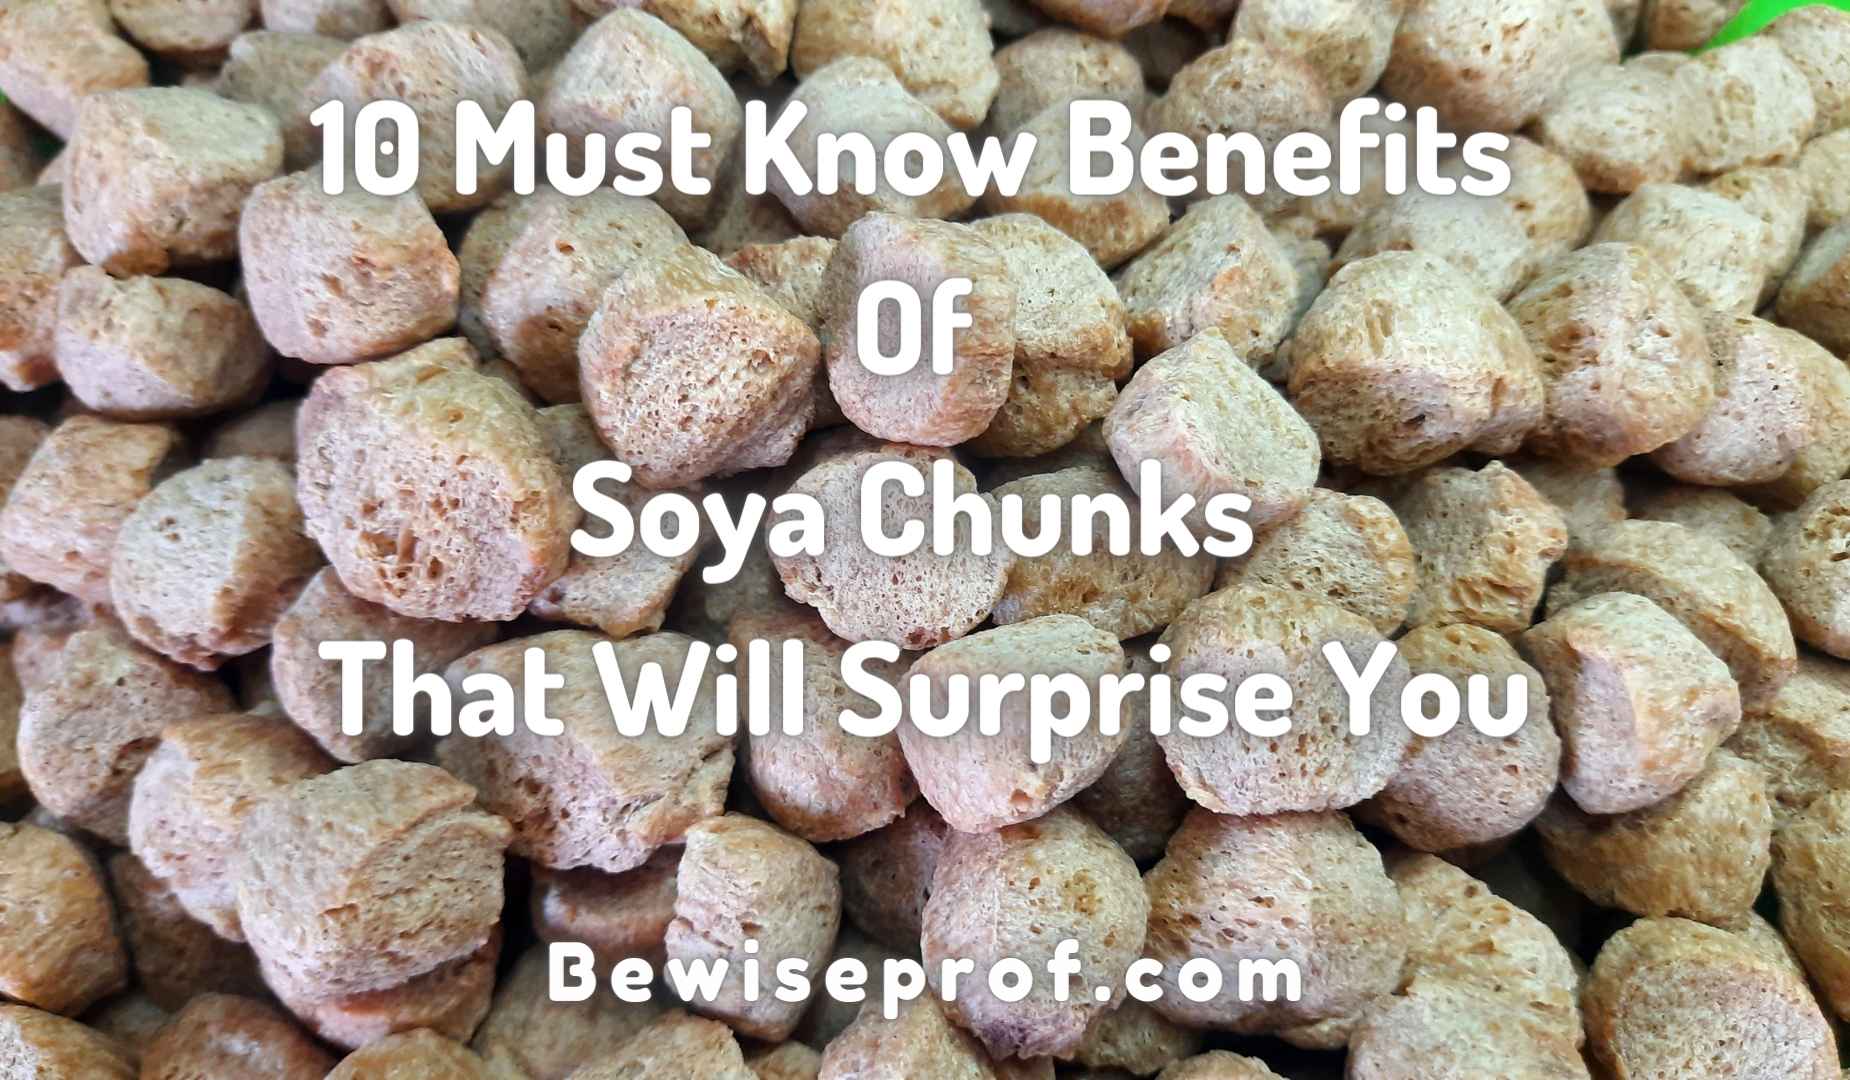 10 Must Know Benefits Of Soya Chunks That Will Surprise You